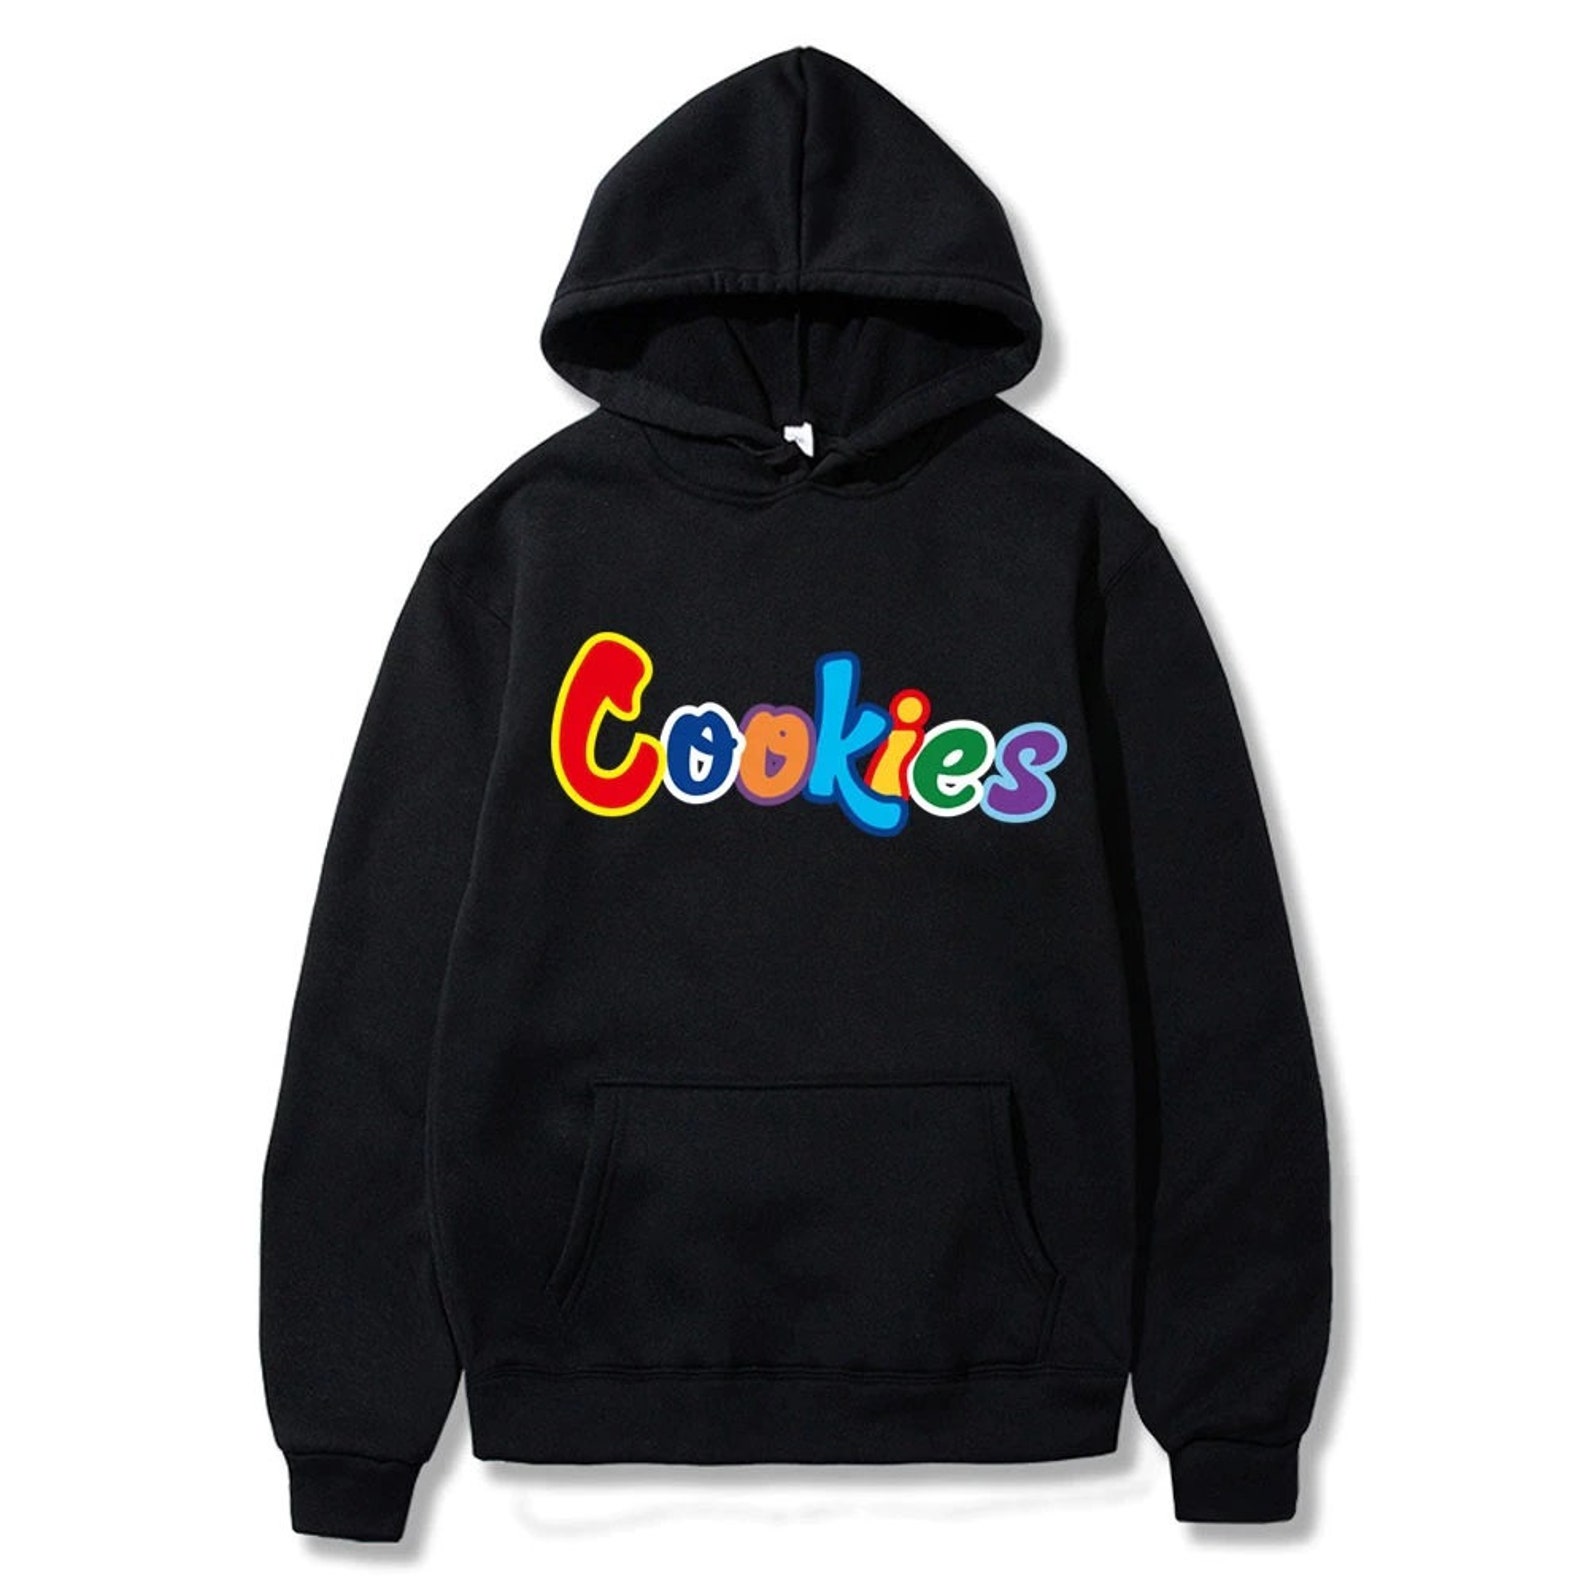 Cookies Hoodies A Blend of Comfort and Street Style